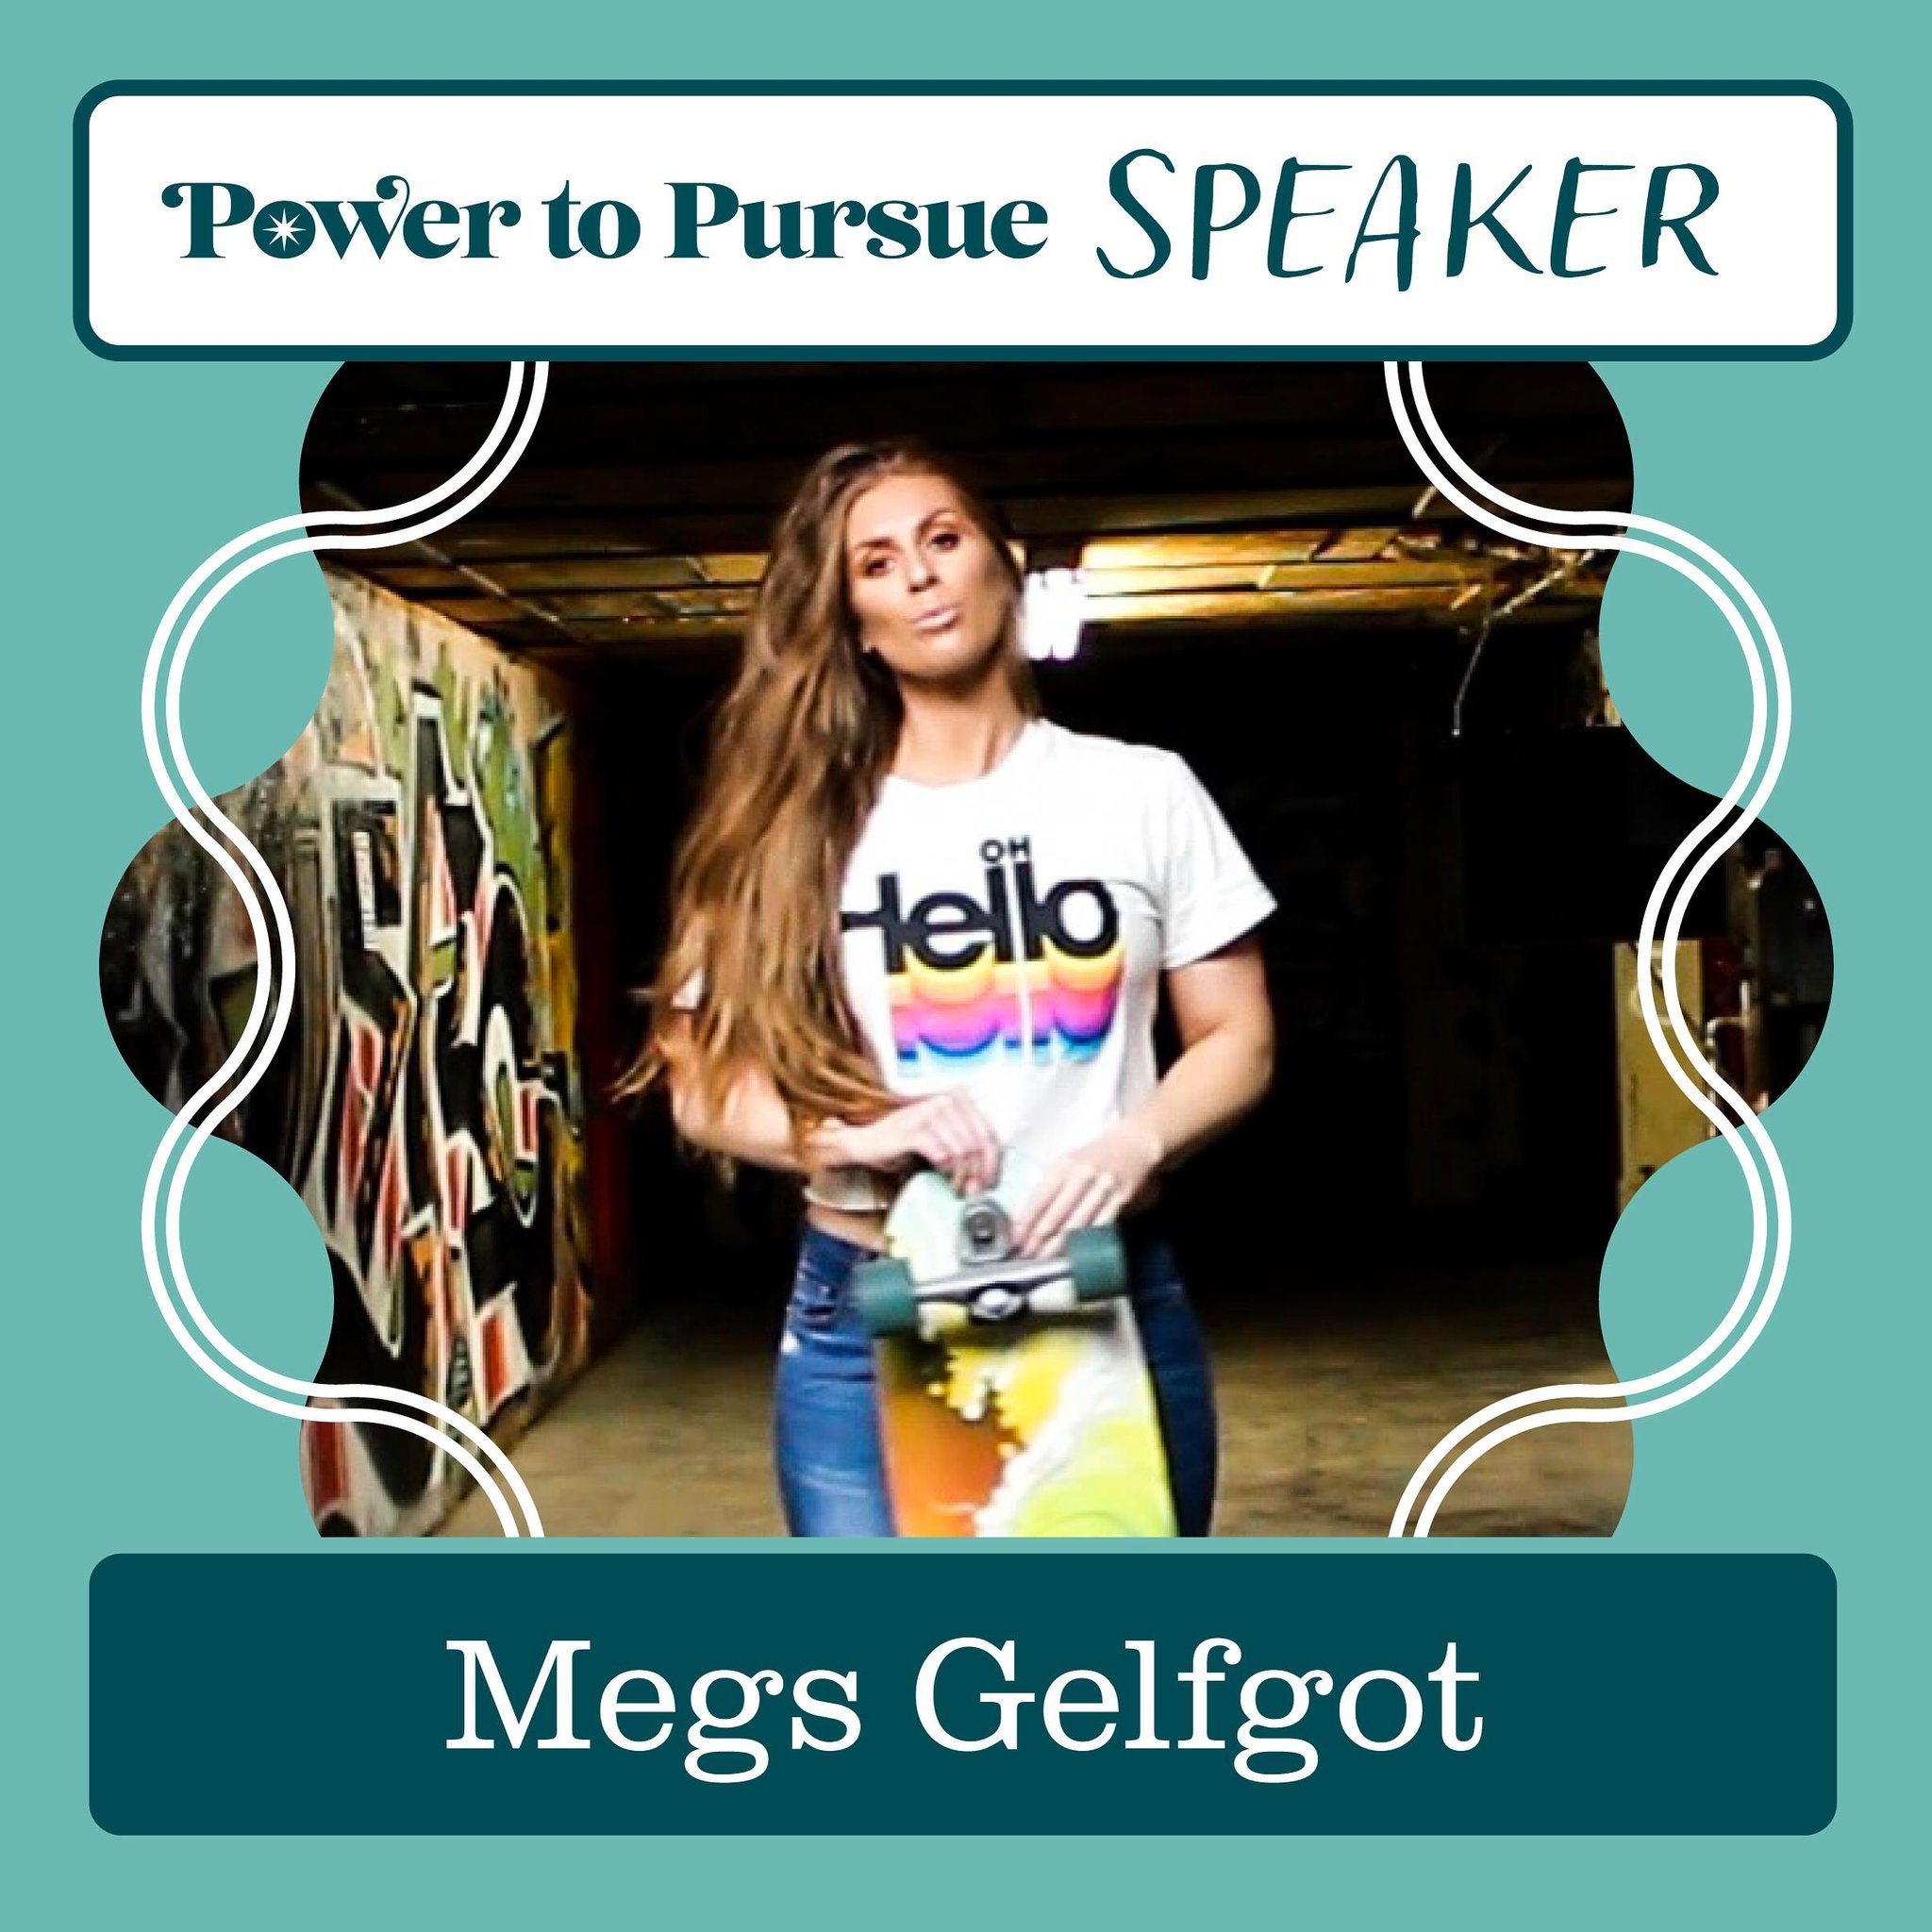 Welcome another speaker this year, Megs Gelfgot!

Megs Gelfgot, at a glance, is an entrepreneur, speaker, wife and mama to two wildlings and a Newfoundland bear pup.  Her keynotes, featured for TEDx and Fortune 500 companies, equip others in expandin